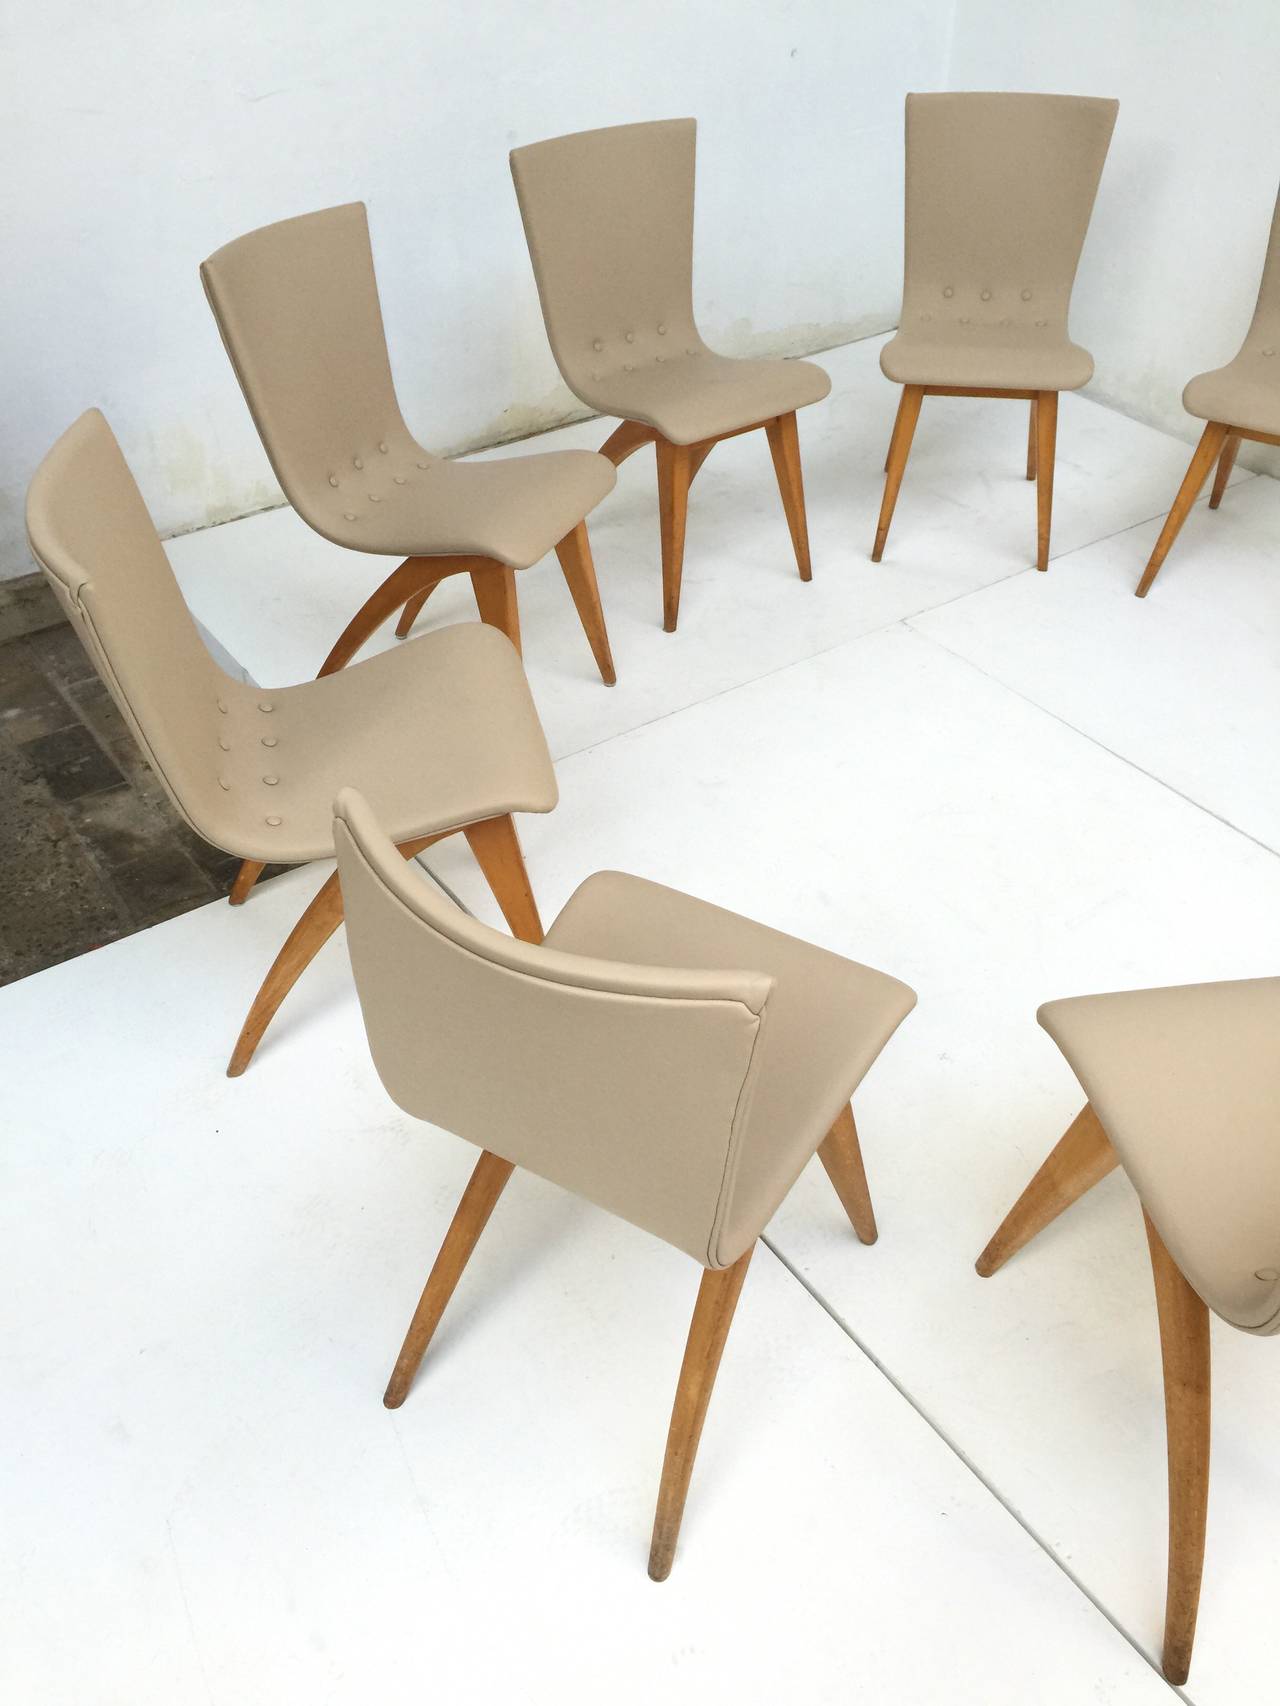 The design of this chair by Dutch designer C. J. Van Os who owned his own furniture company in Culemborg dates back to 1949 and was in production during the 1950s.

The chairs are of great quality with nice organic solid birch legs and new genuine